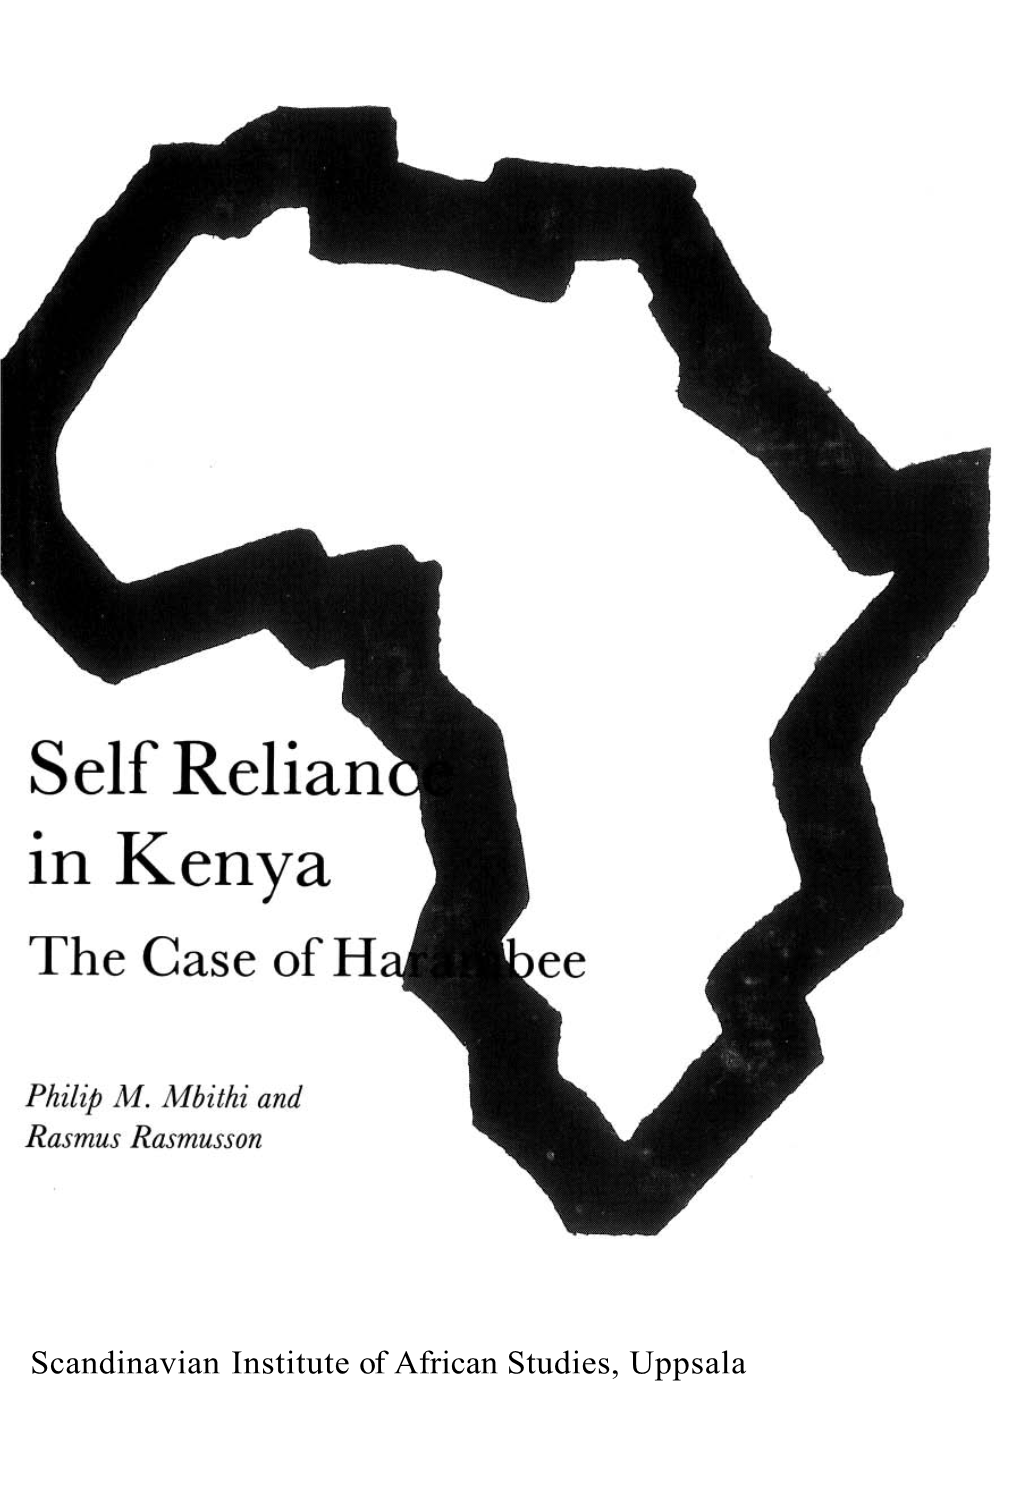 Self Reliance in Kenya the Case of Harambee